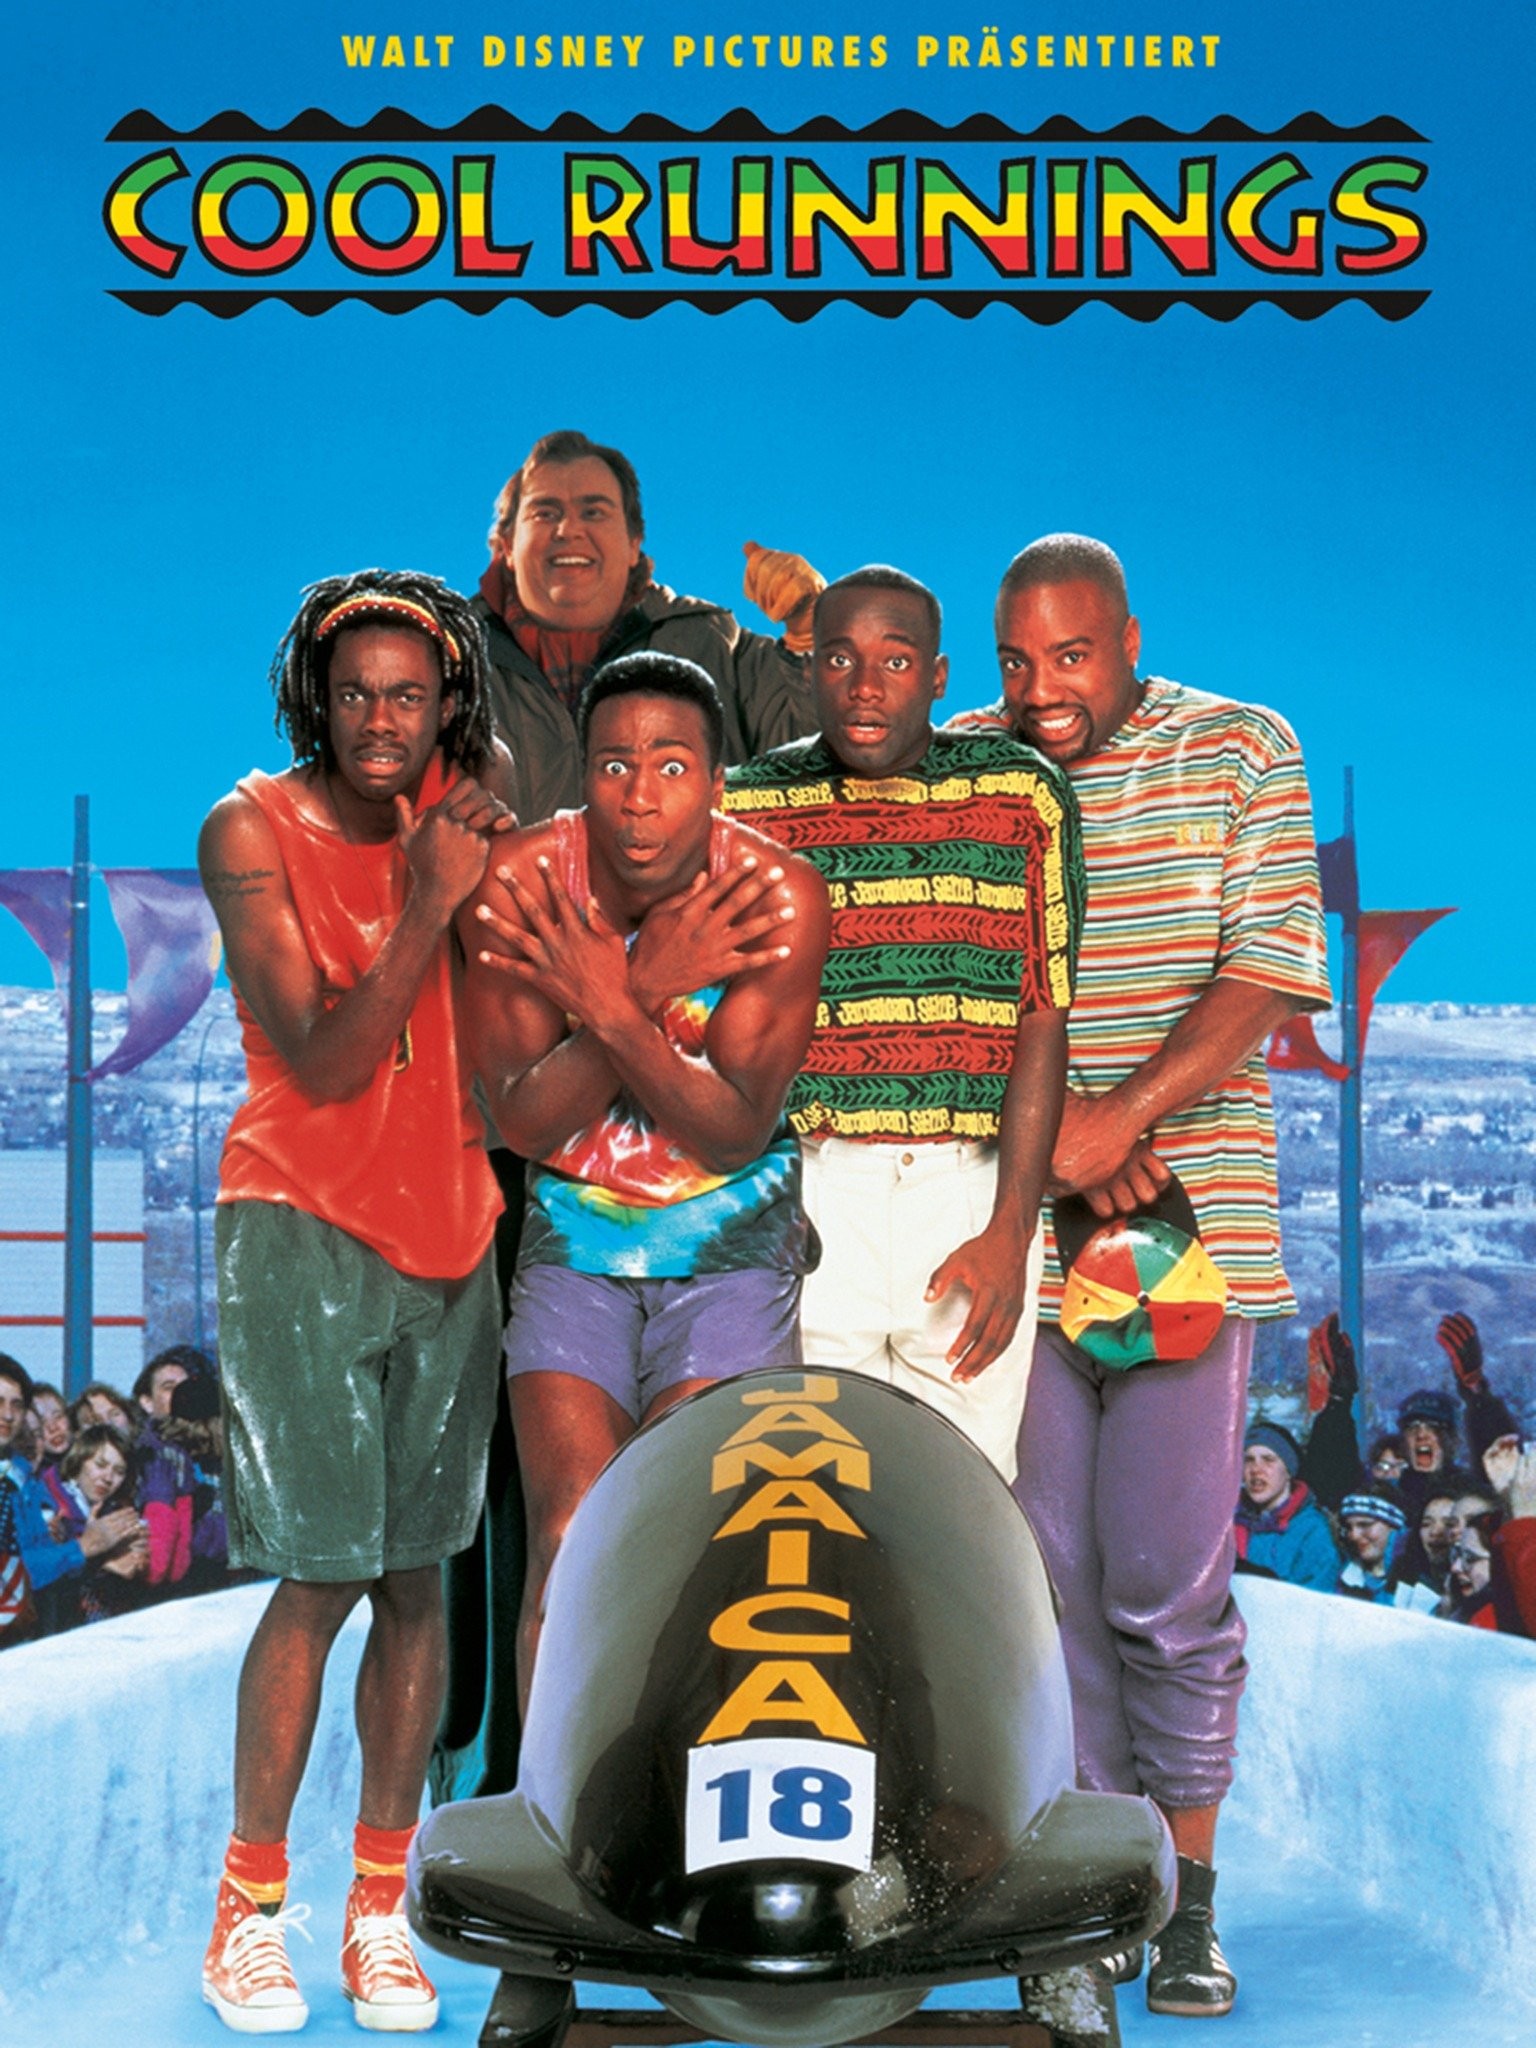 Cool Runnings: Music From The Motion Picture